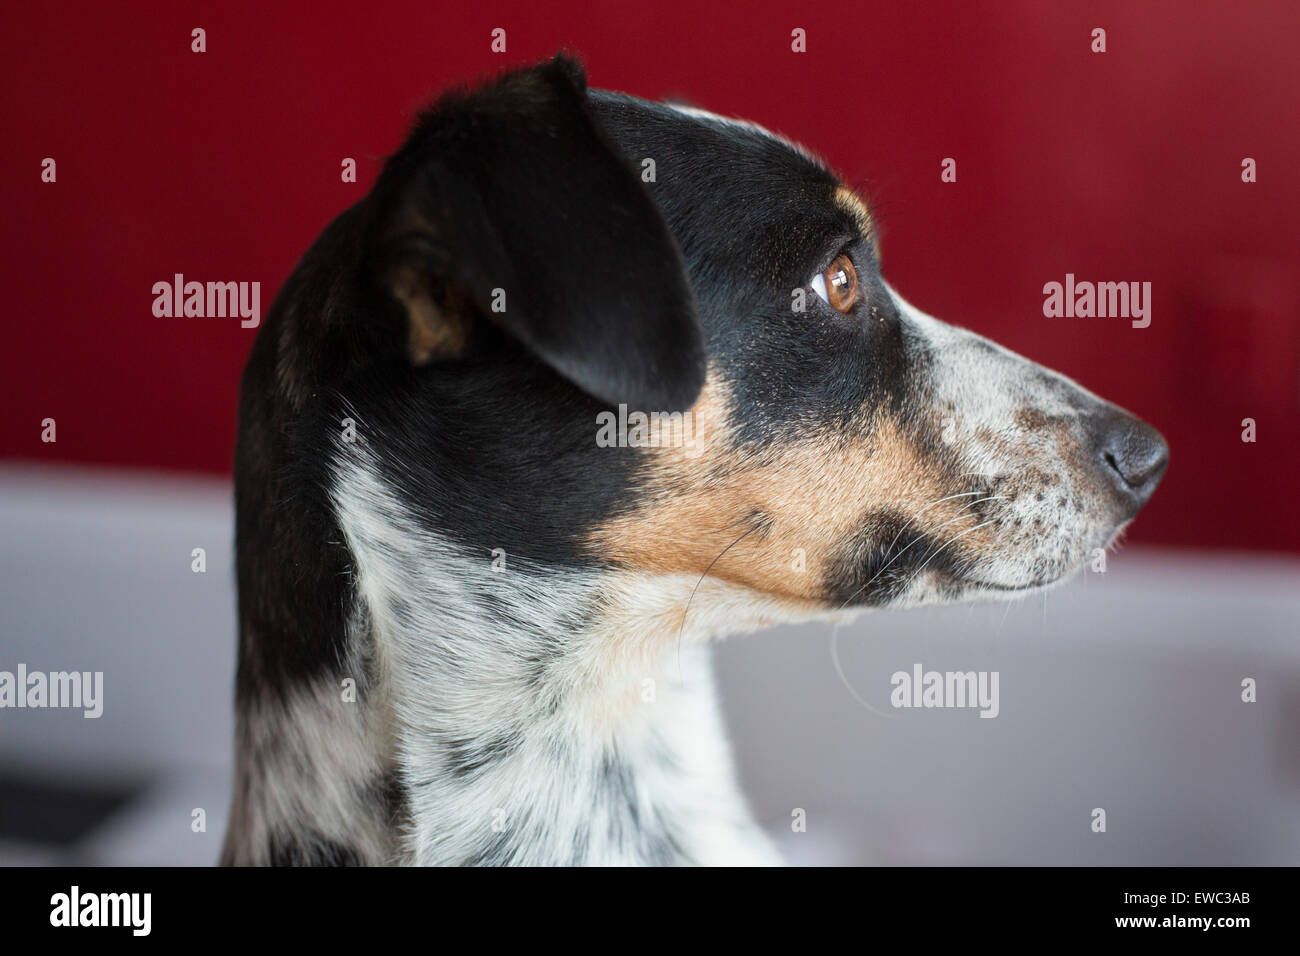 Wheat Ridge, Colorado - A portrait of Chloe the dog. She is part Whippet and part Jack Russell terrier. Stock Photo